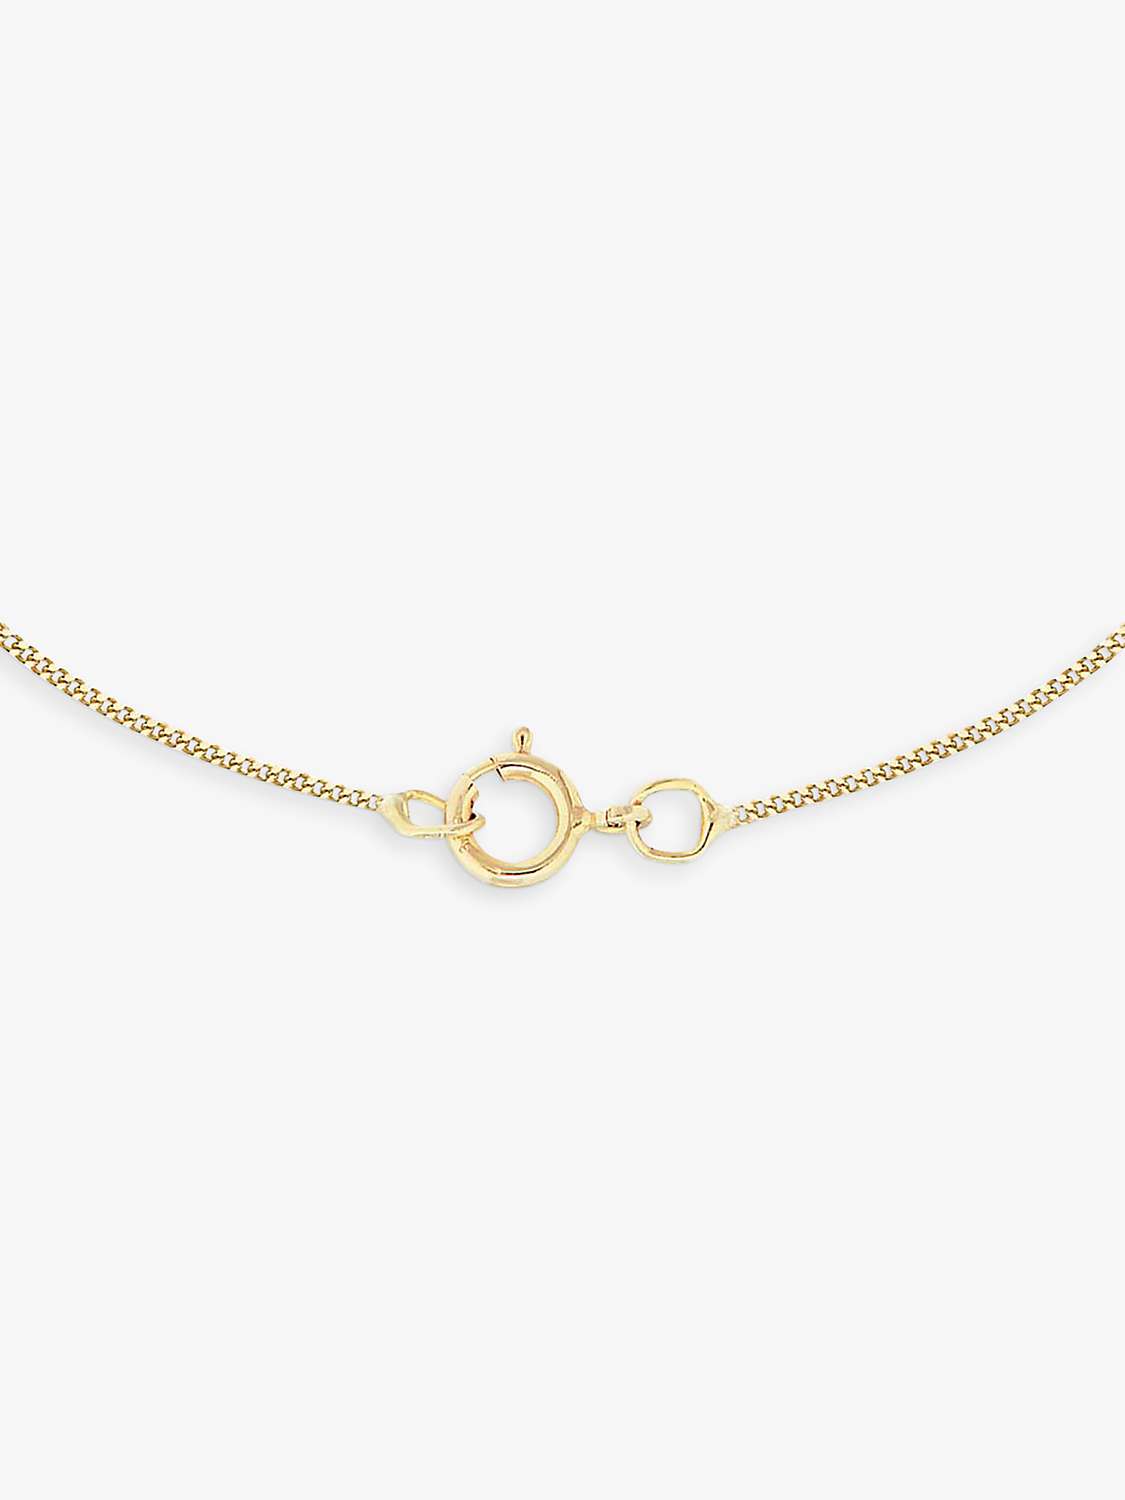 Buy IBB 9ct Yellow Gold Short Curb Link Chain Necklace, Gold Online at johnlewis.com